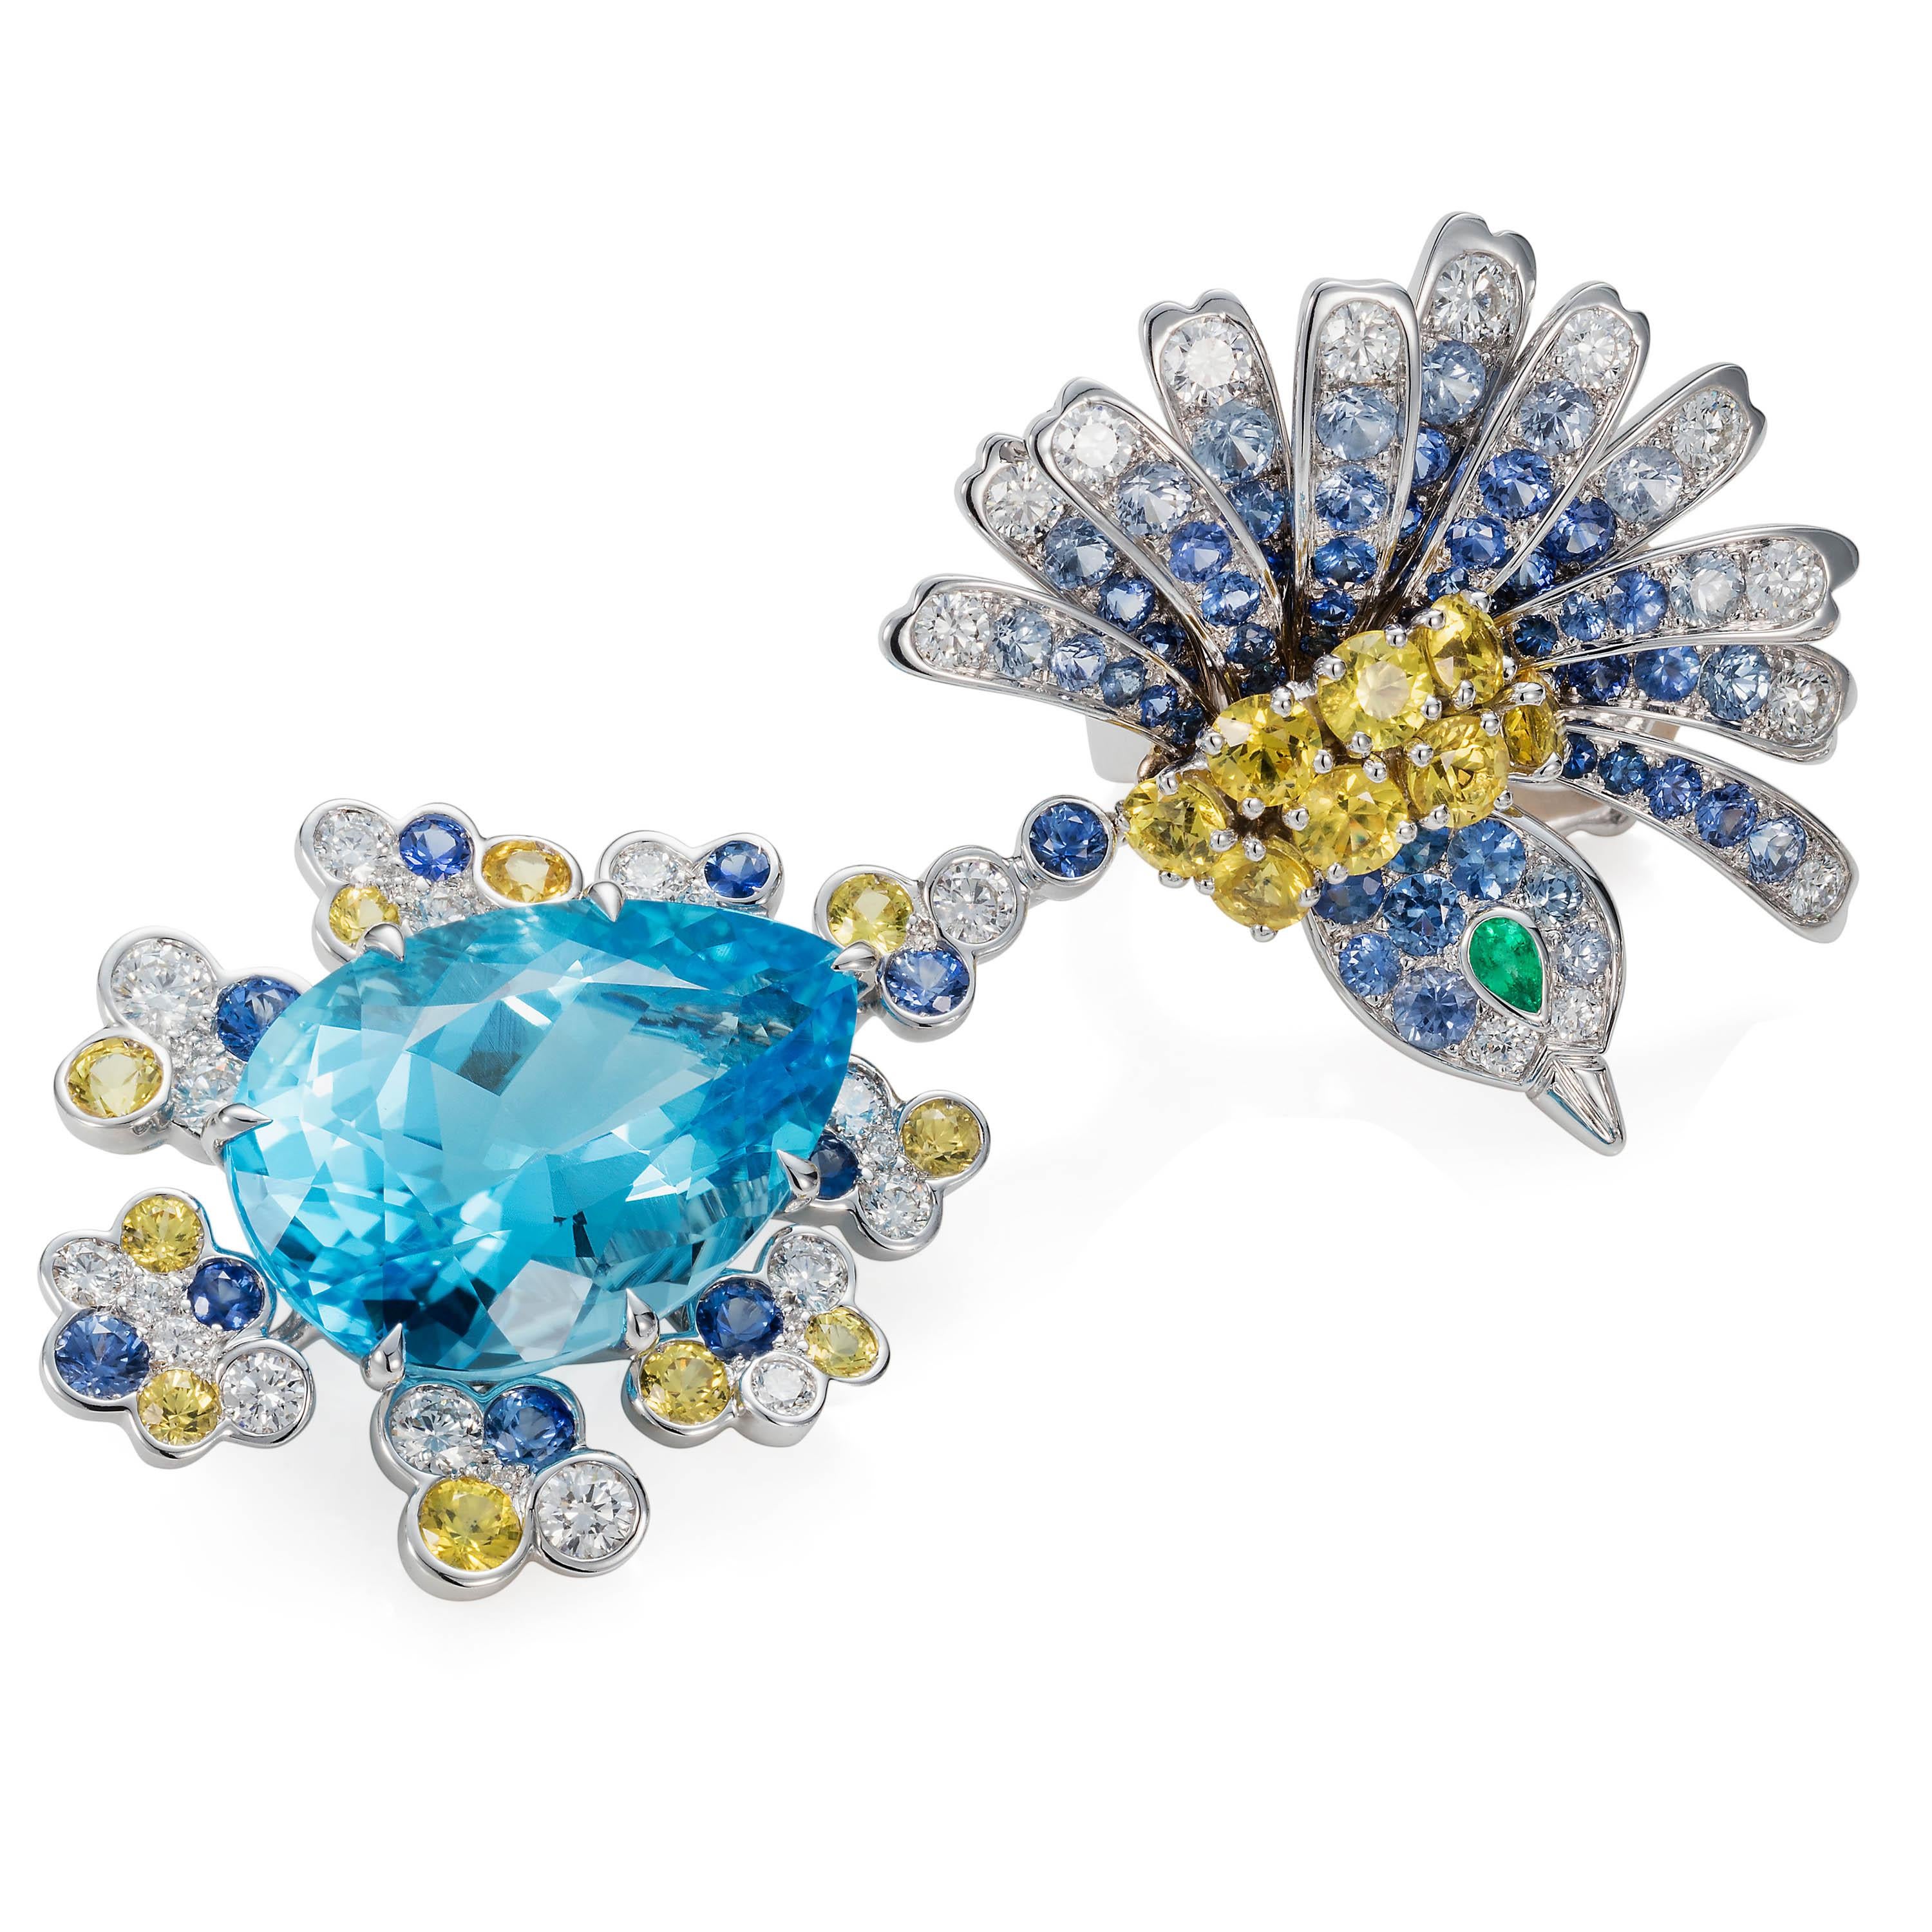 One of a kind Hummingbird earrings with 2 pear-shaped topaz weighing 32.80 carats, 178 multicolored sapphires weighing 6.35 carats, 65 round diamonds weighing 2.44 carats and 2 pear-shaped emerald eyes weighing 0.09 carats.
the setting crafted in